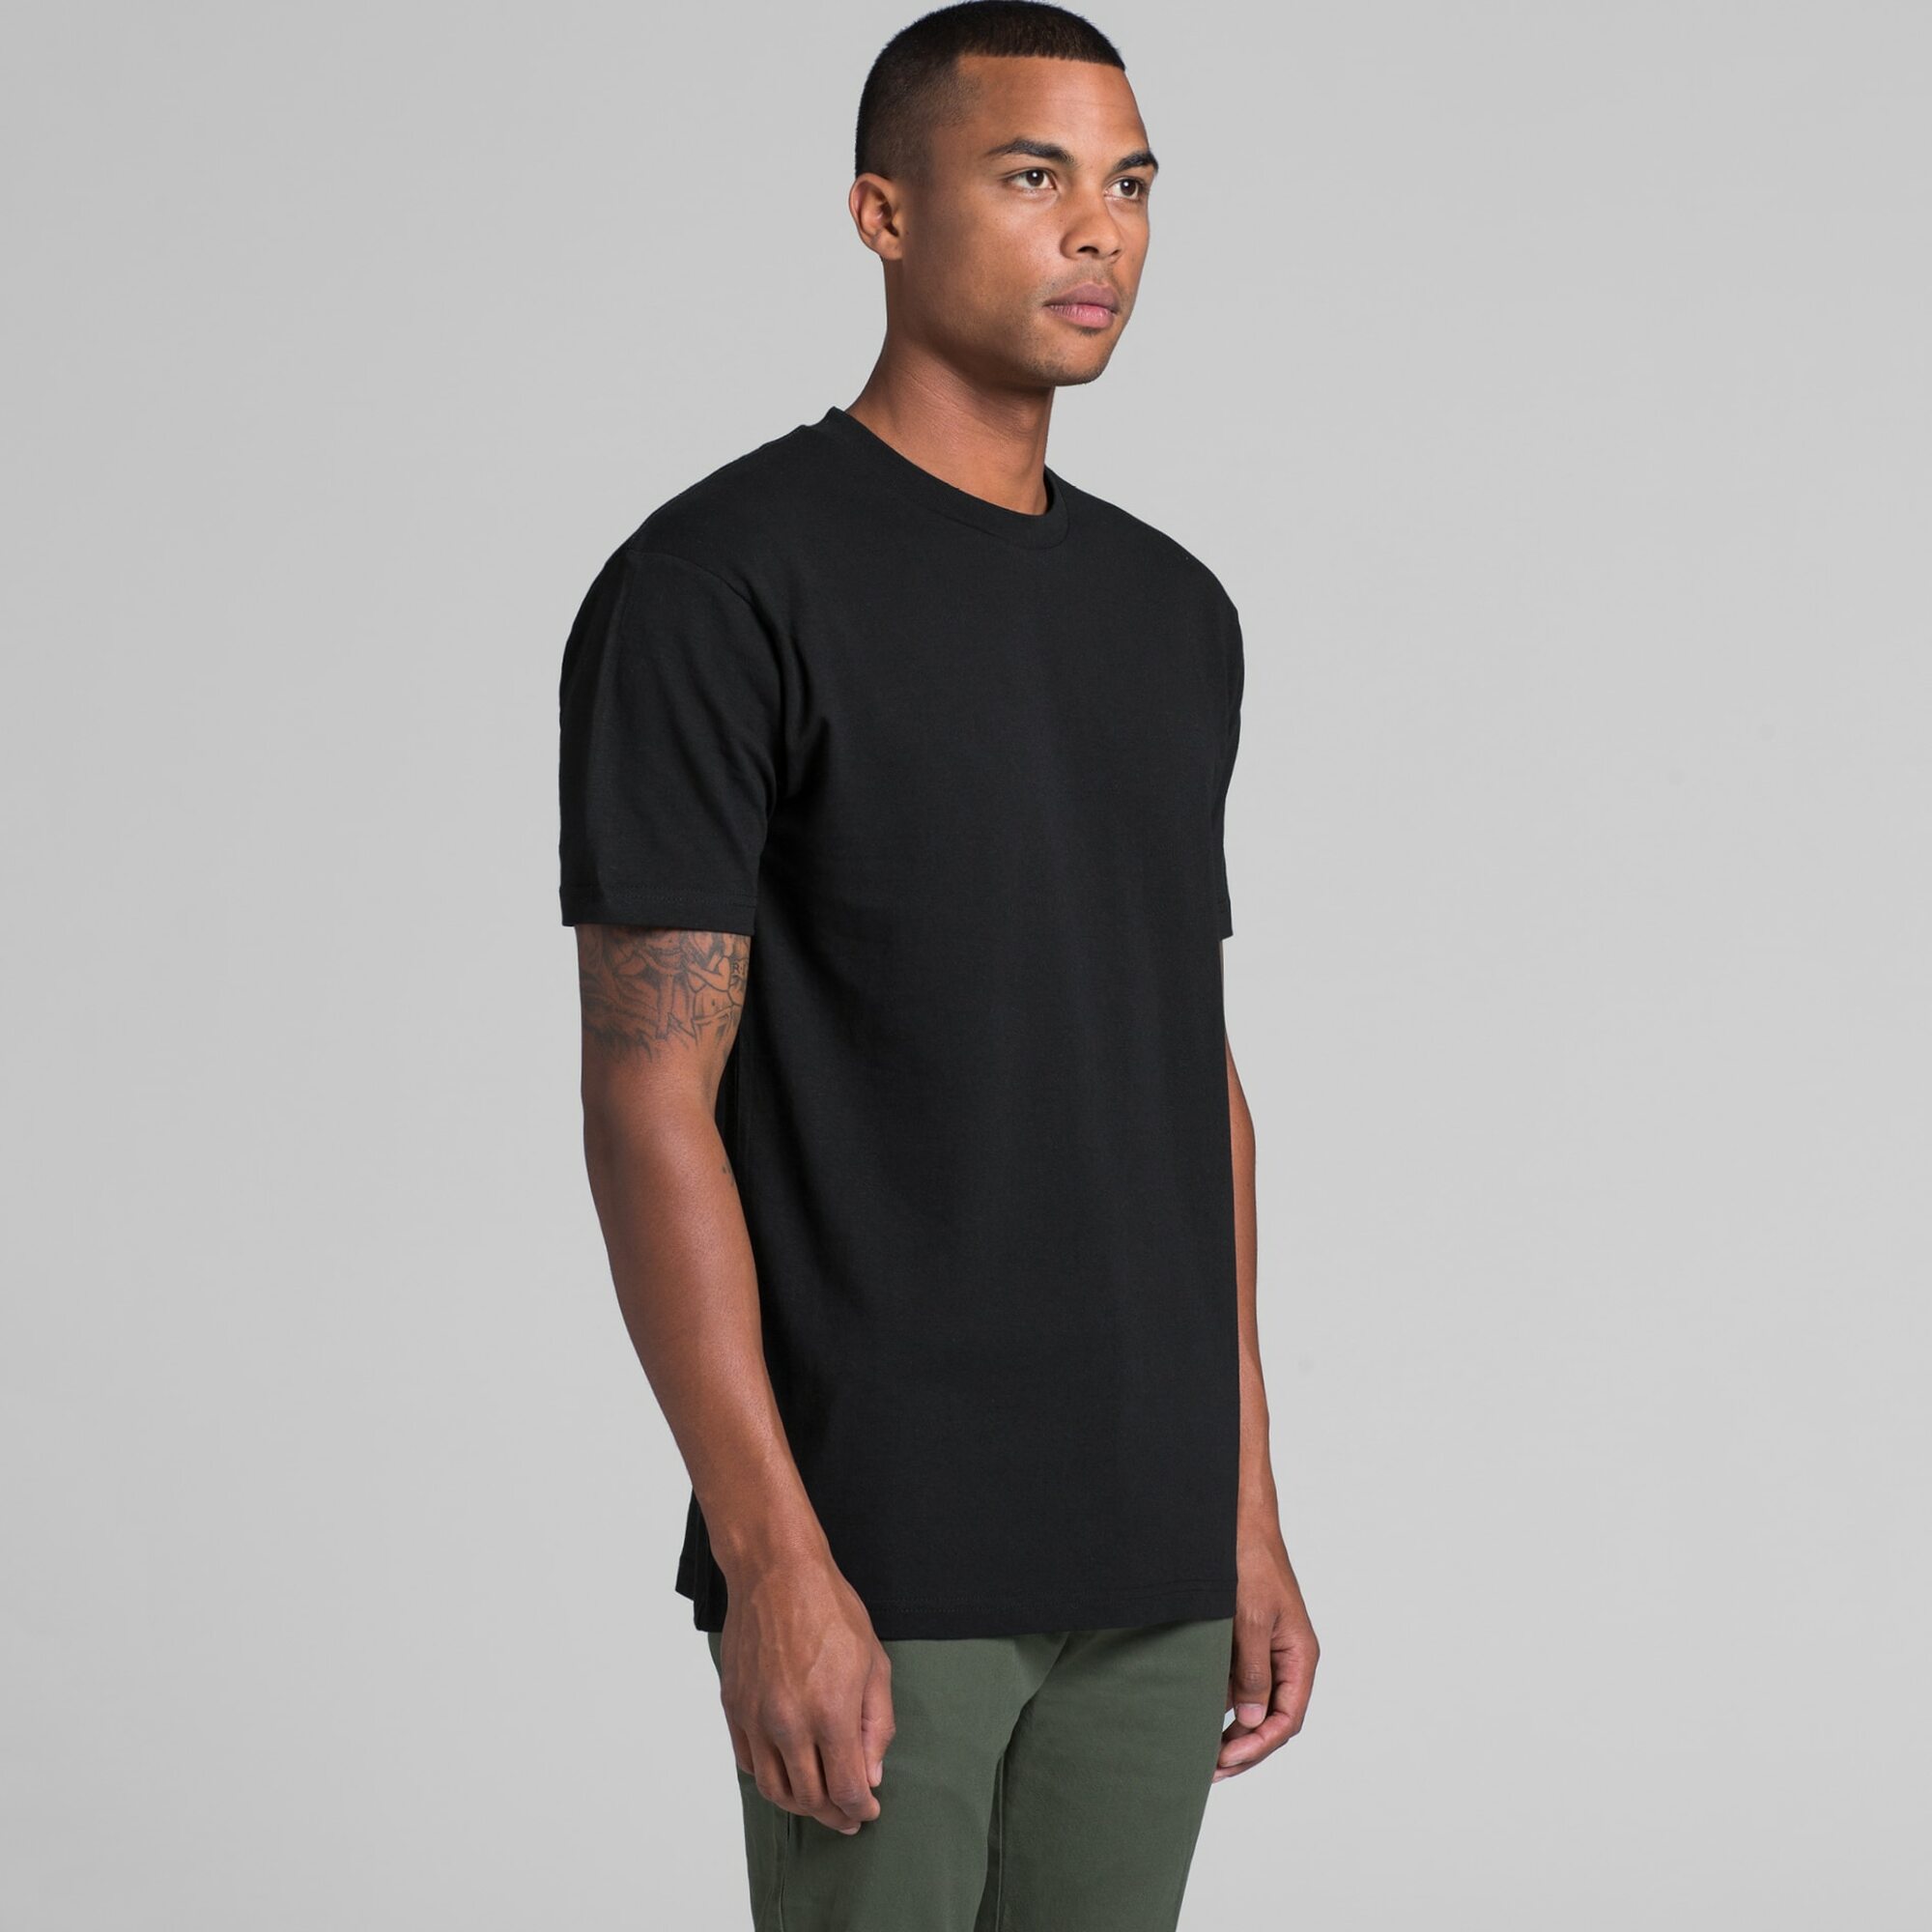 Men's Block Tee (3XL-5XL) | Branded Block Tee | Printed Block Tee NZ | AS Colour | Withers & Co